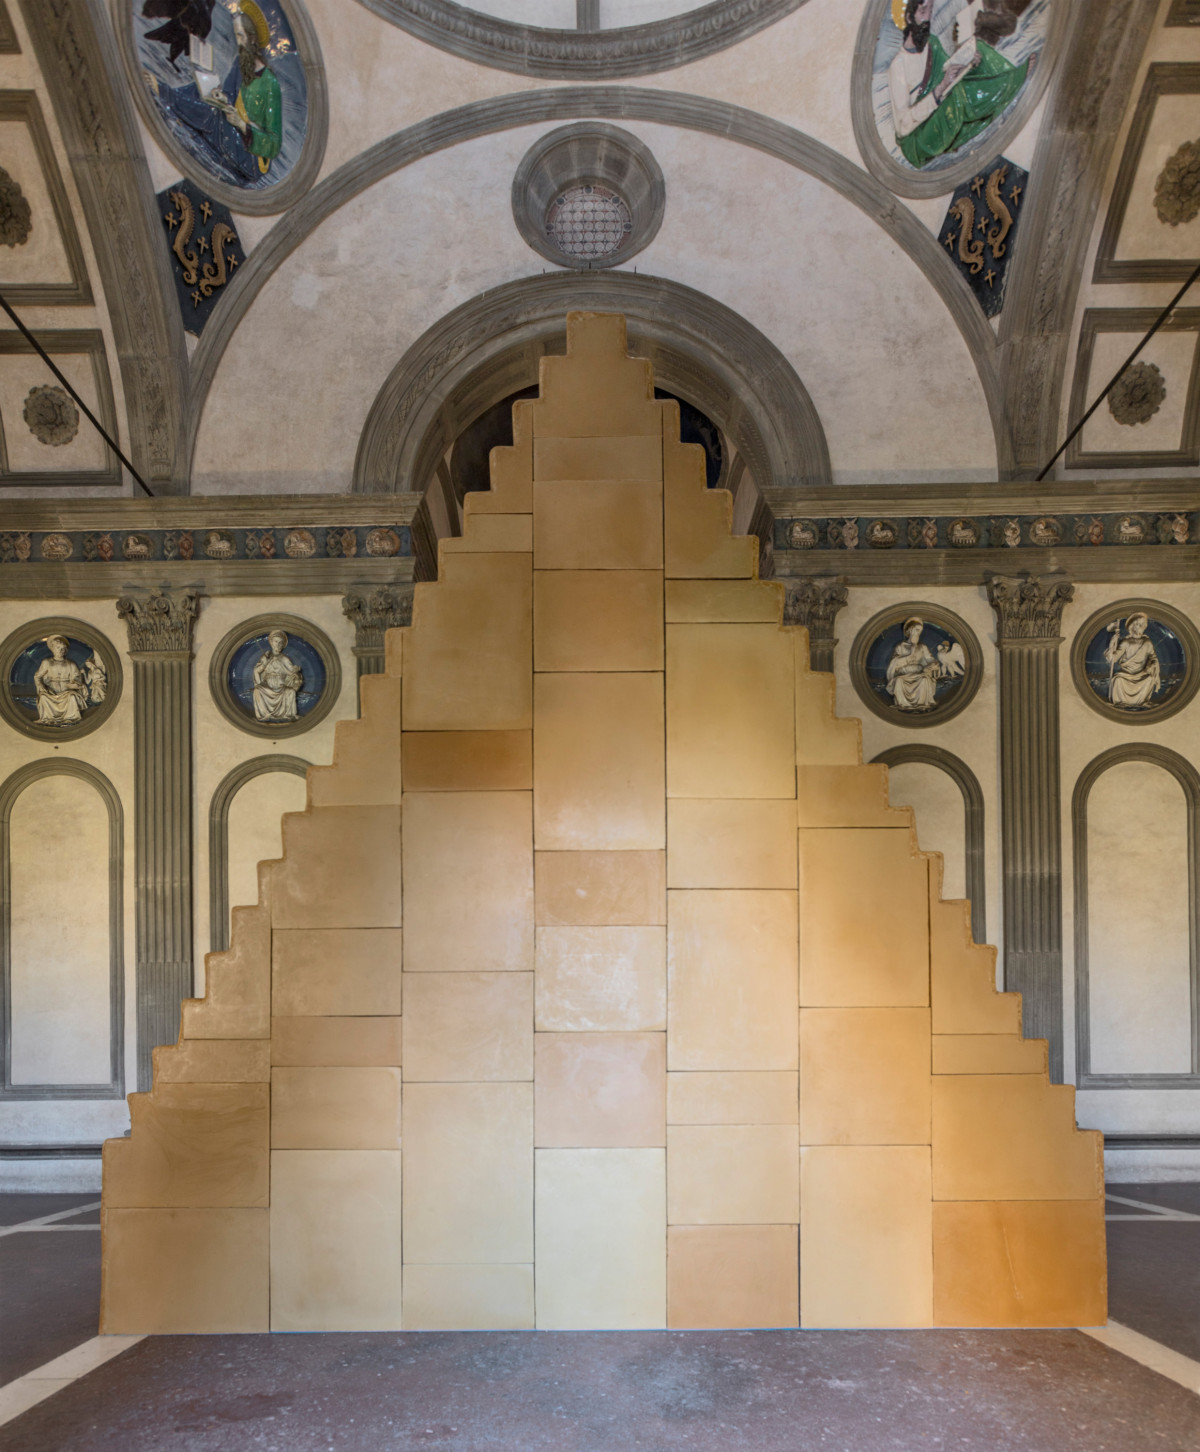 Wolfgang Laib, ‘Without Beginning and Without End , Cappella Pazzi, Complesso Monumentale di Santa Croce, Florence’, 2019